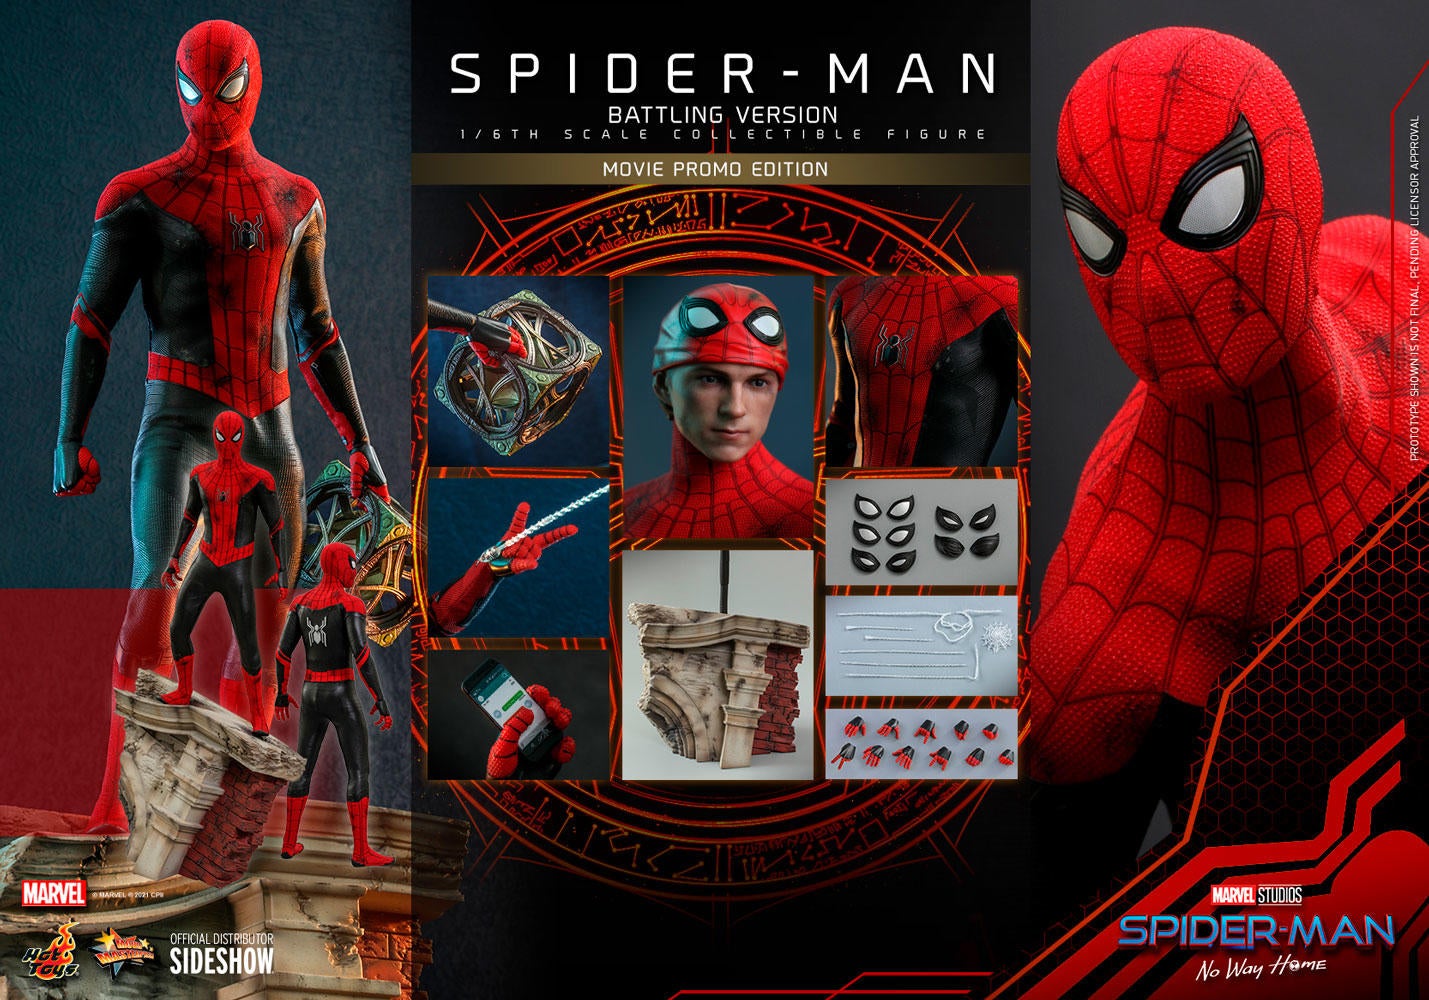 spider-man-movie-promo-edition-sixth-scale-figure-by-hot-toys-marvel-gallery-61a51da27f735.jpg